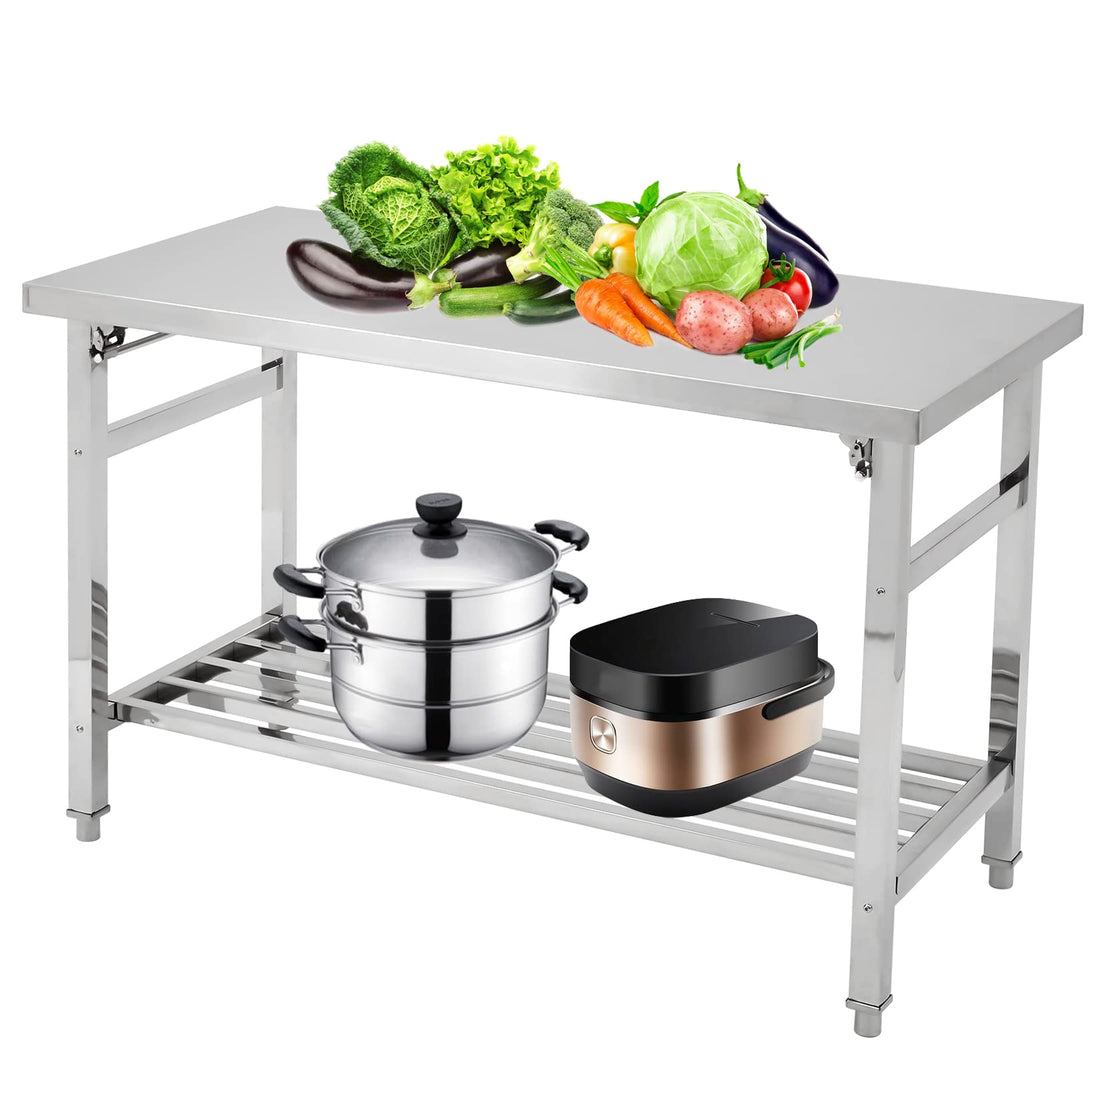 Stainless Steel Prep Table 48 x 24 Inch NSF Commercial Heavy Duty Stainless Steel Work Folding Table